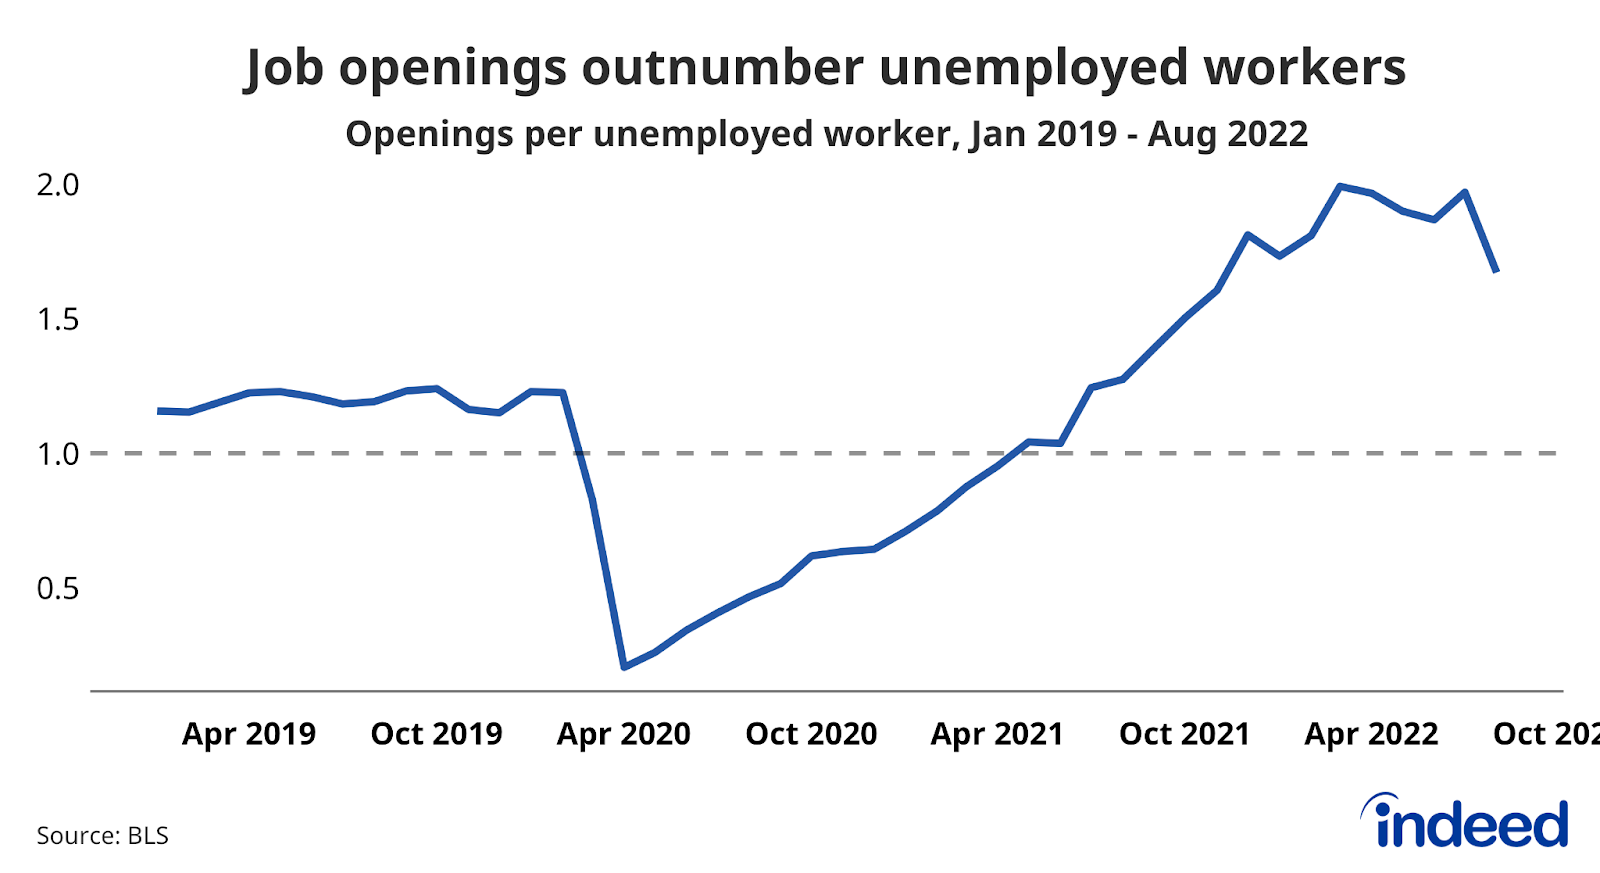 A line chart entitled “Job openings outnumber unemployed workers” shows the job openings per unemployed workers from January 2019 through August 2022.